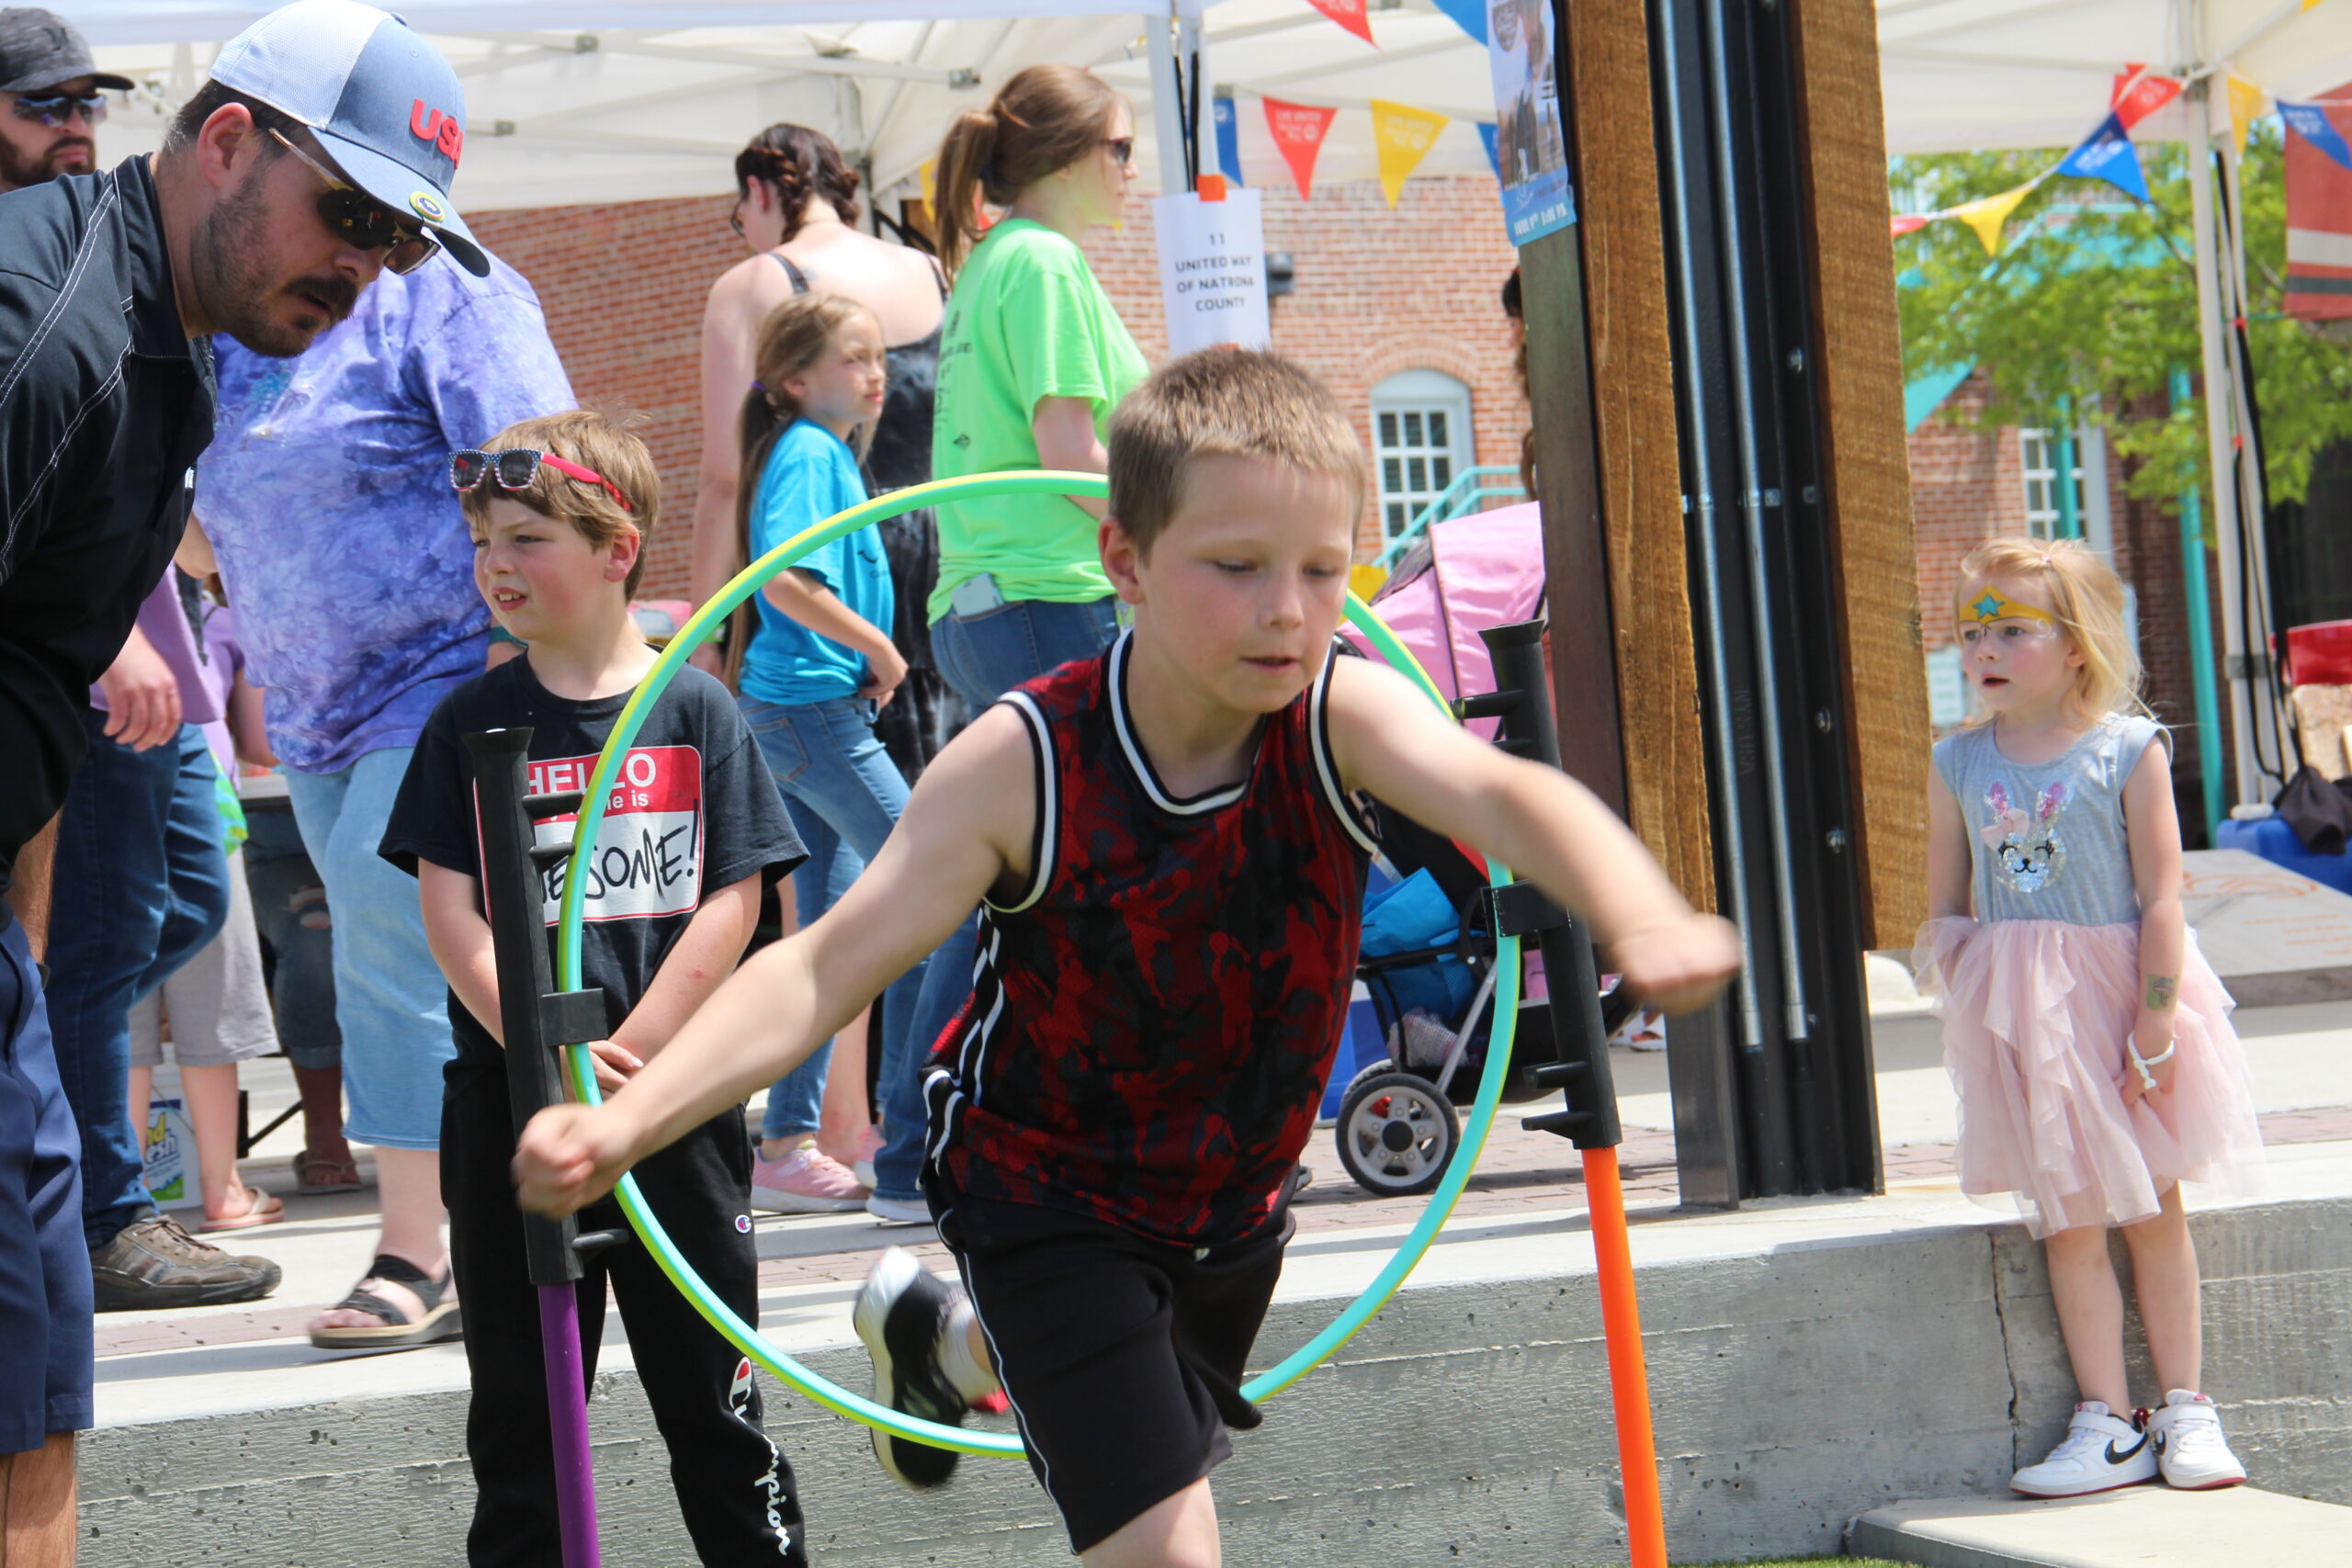 PHOTOS: YMCA’s Healthy Kids Day gives families a jump start on an active summer